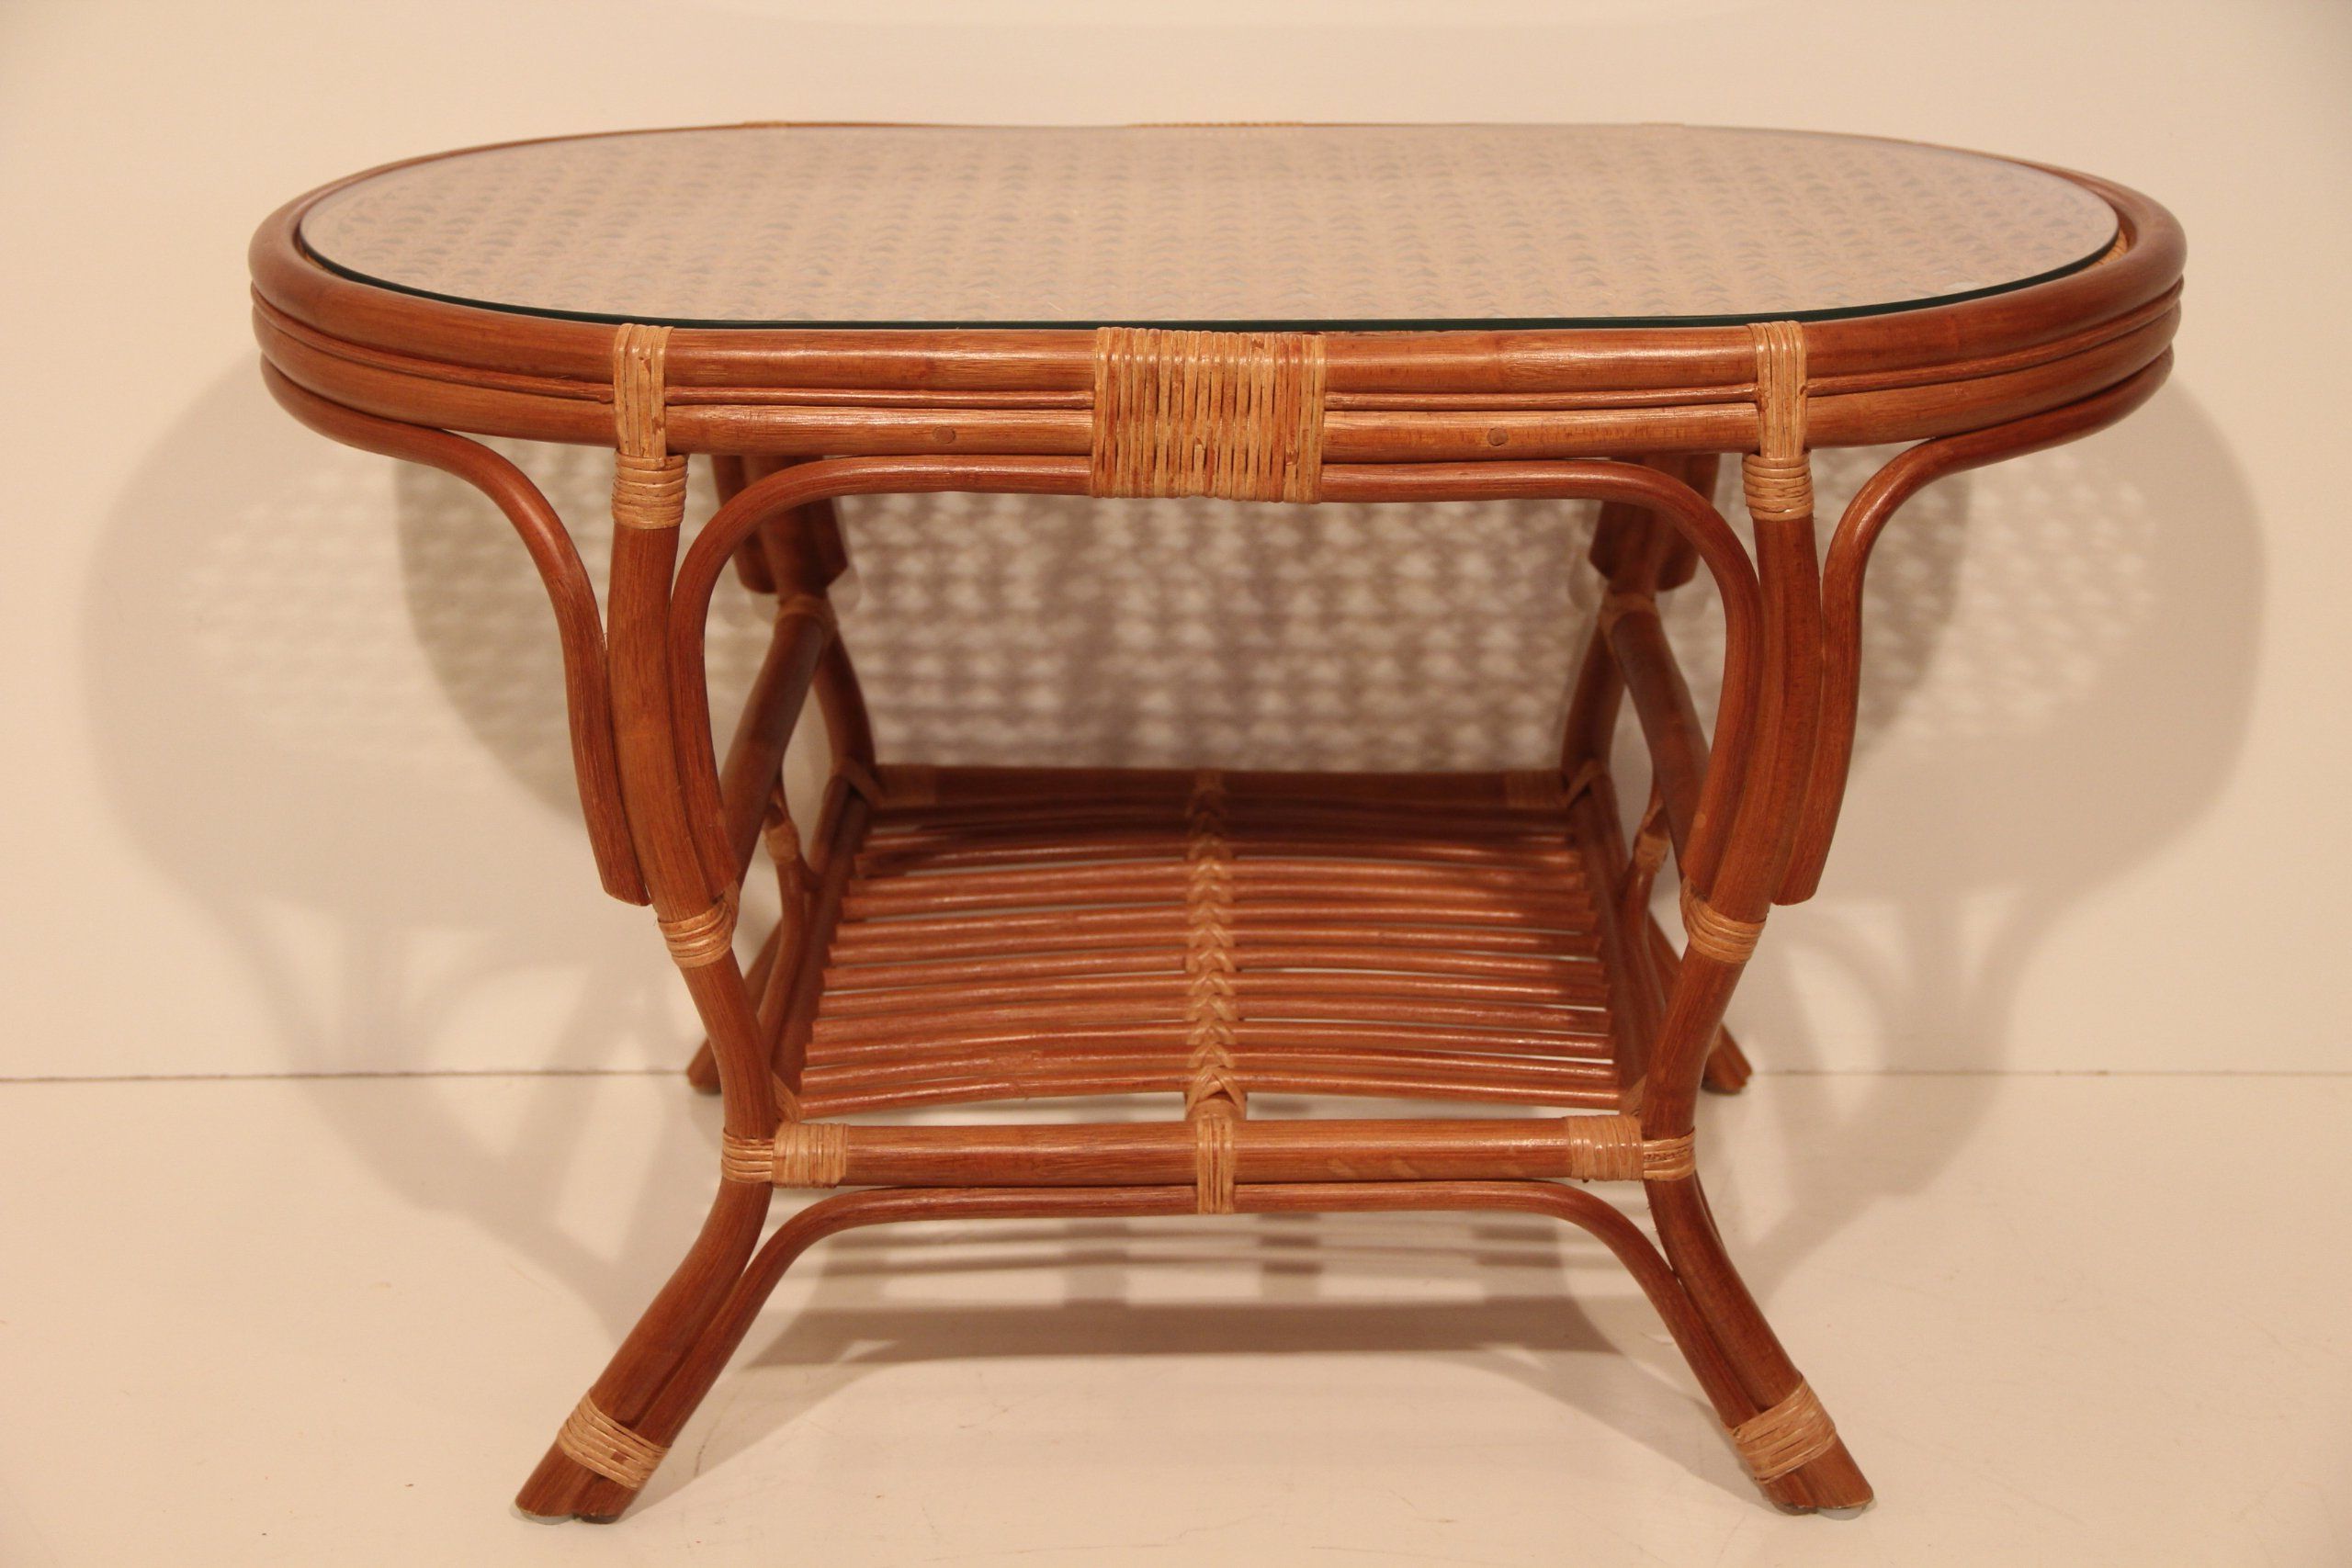 Recent Pelangi Oval Coffee Table With Glass Top Natural Rattan Throughout Natural Woven Banana Coffee Tables (View 19 of 20)